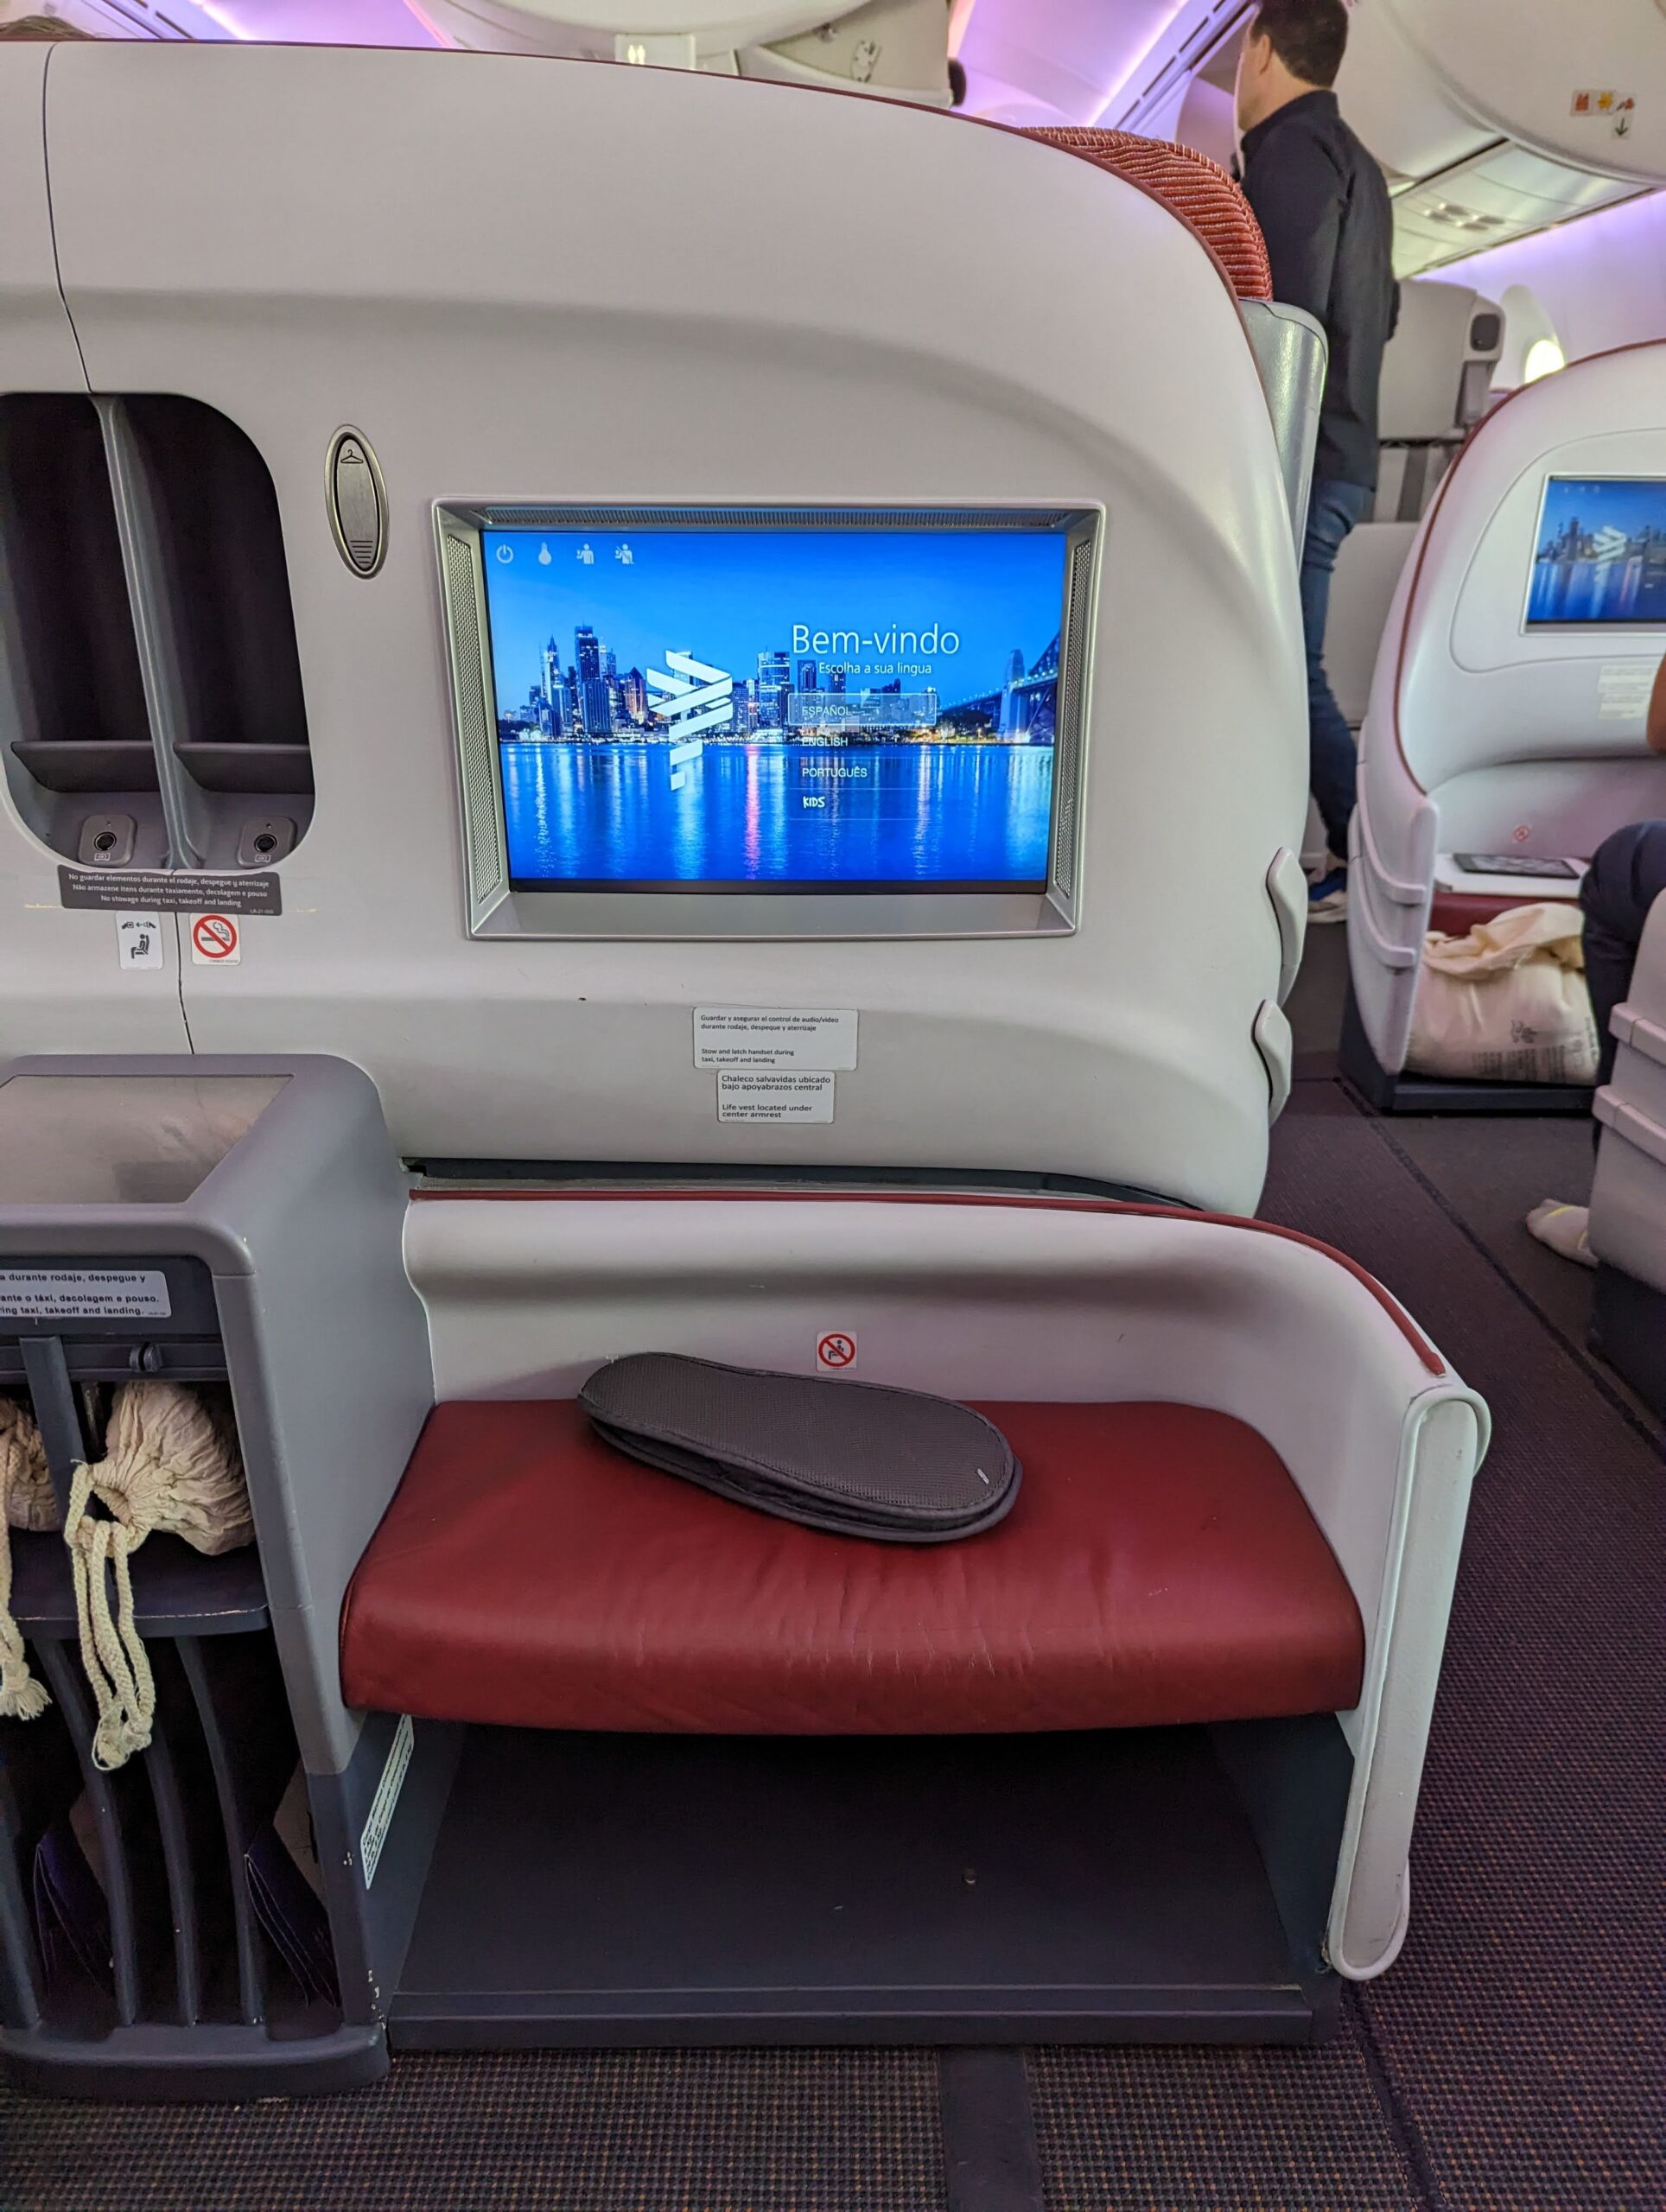 a tv screen on a seat in an airplane